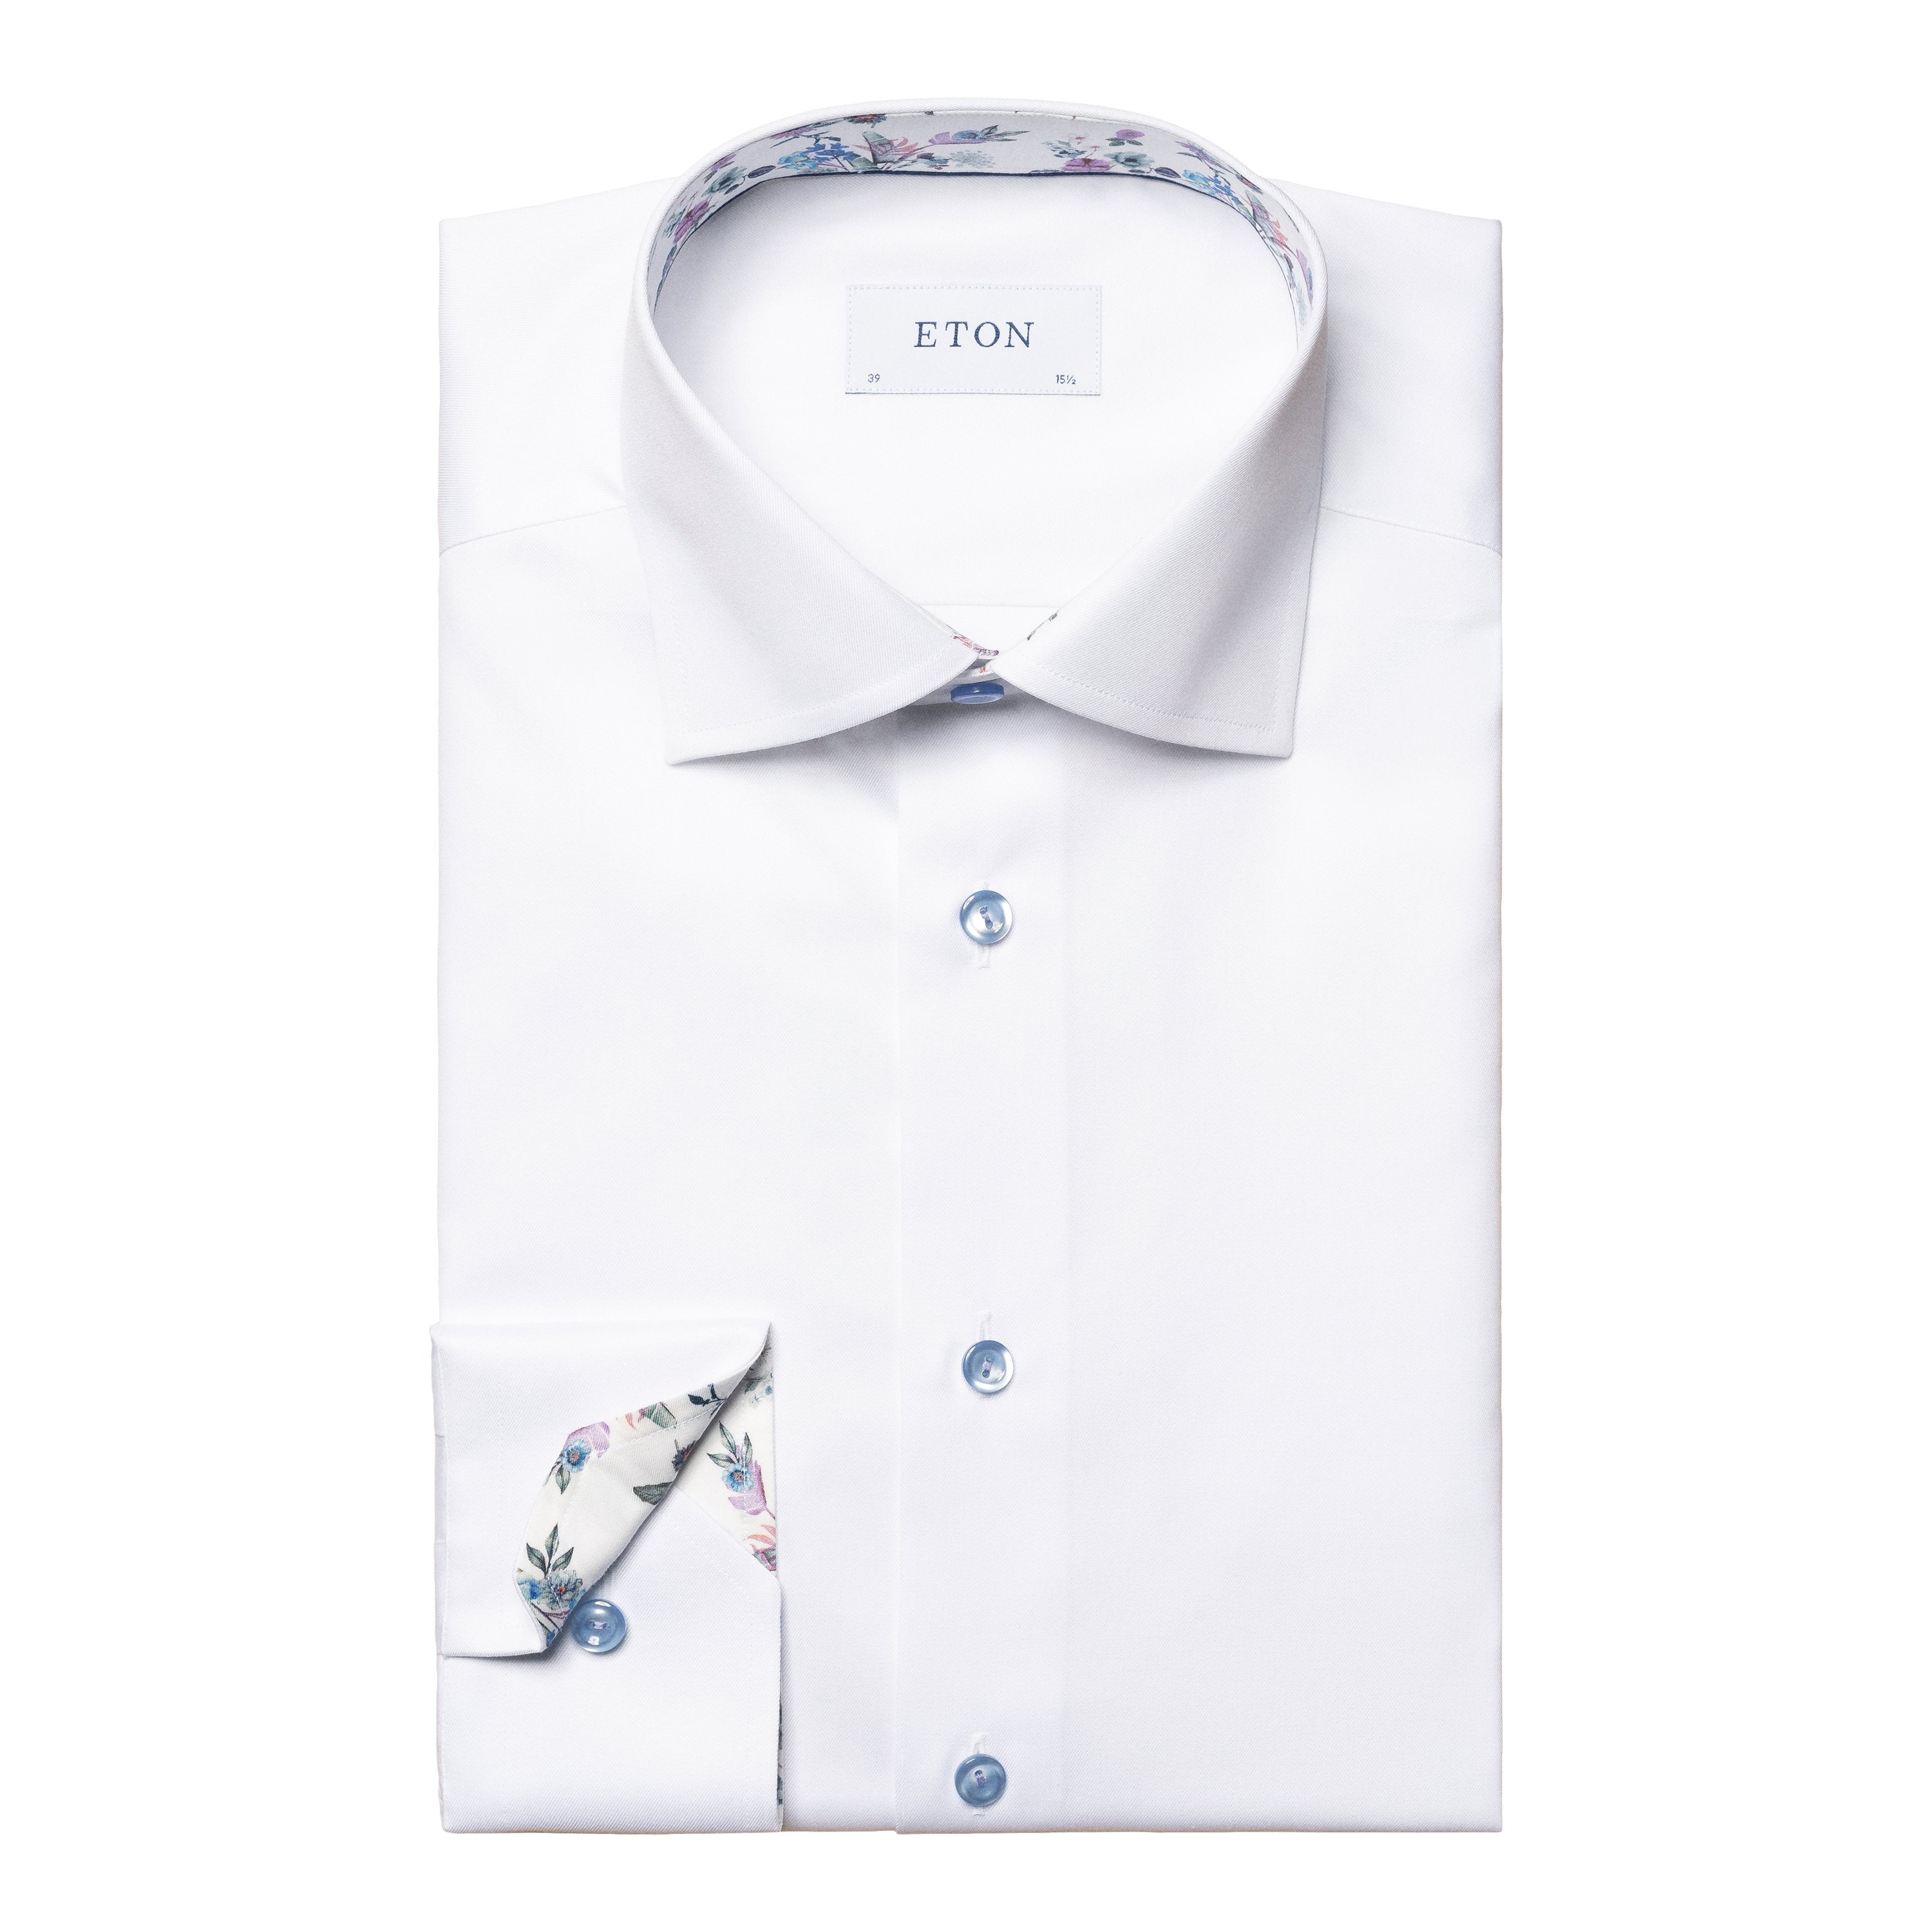 ETON - White CONTEMPORARY FIT Signature Twill Shirt - Floral Contrast Details 10001168300